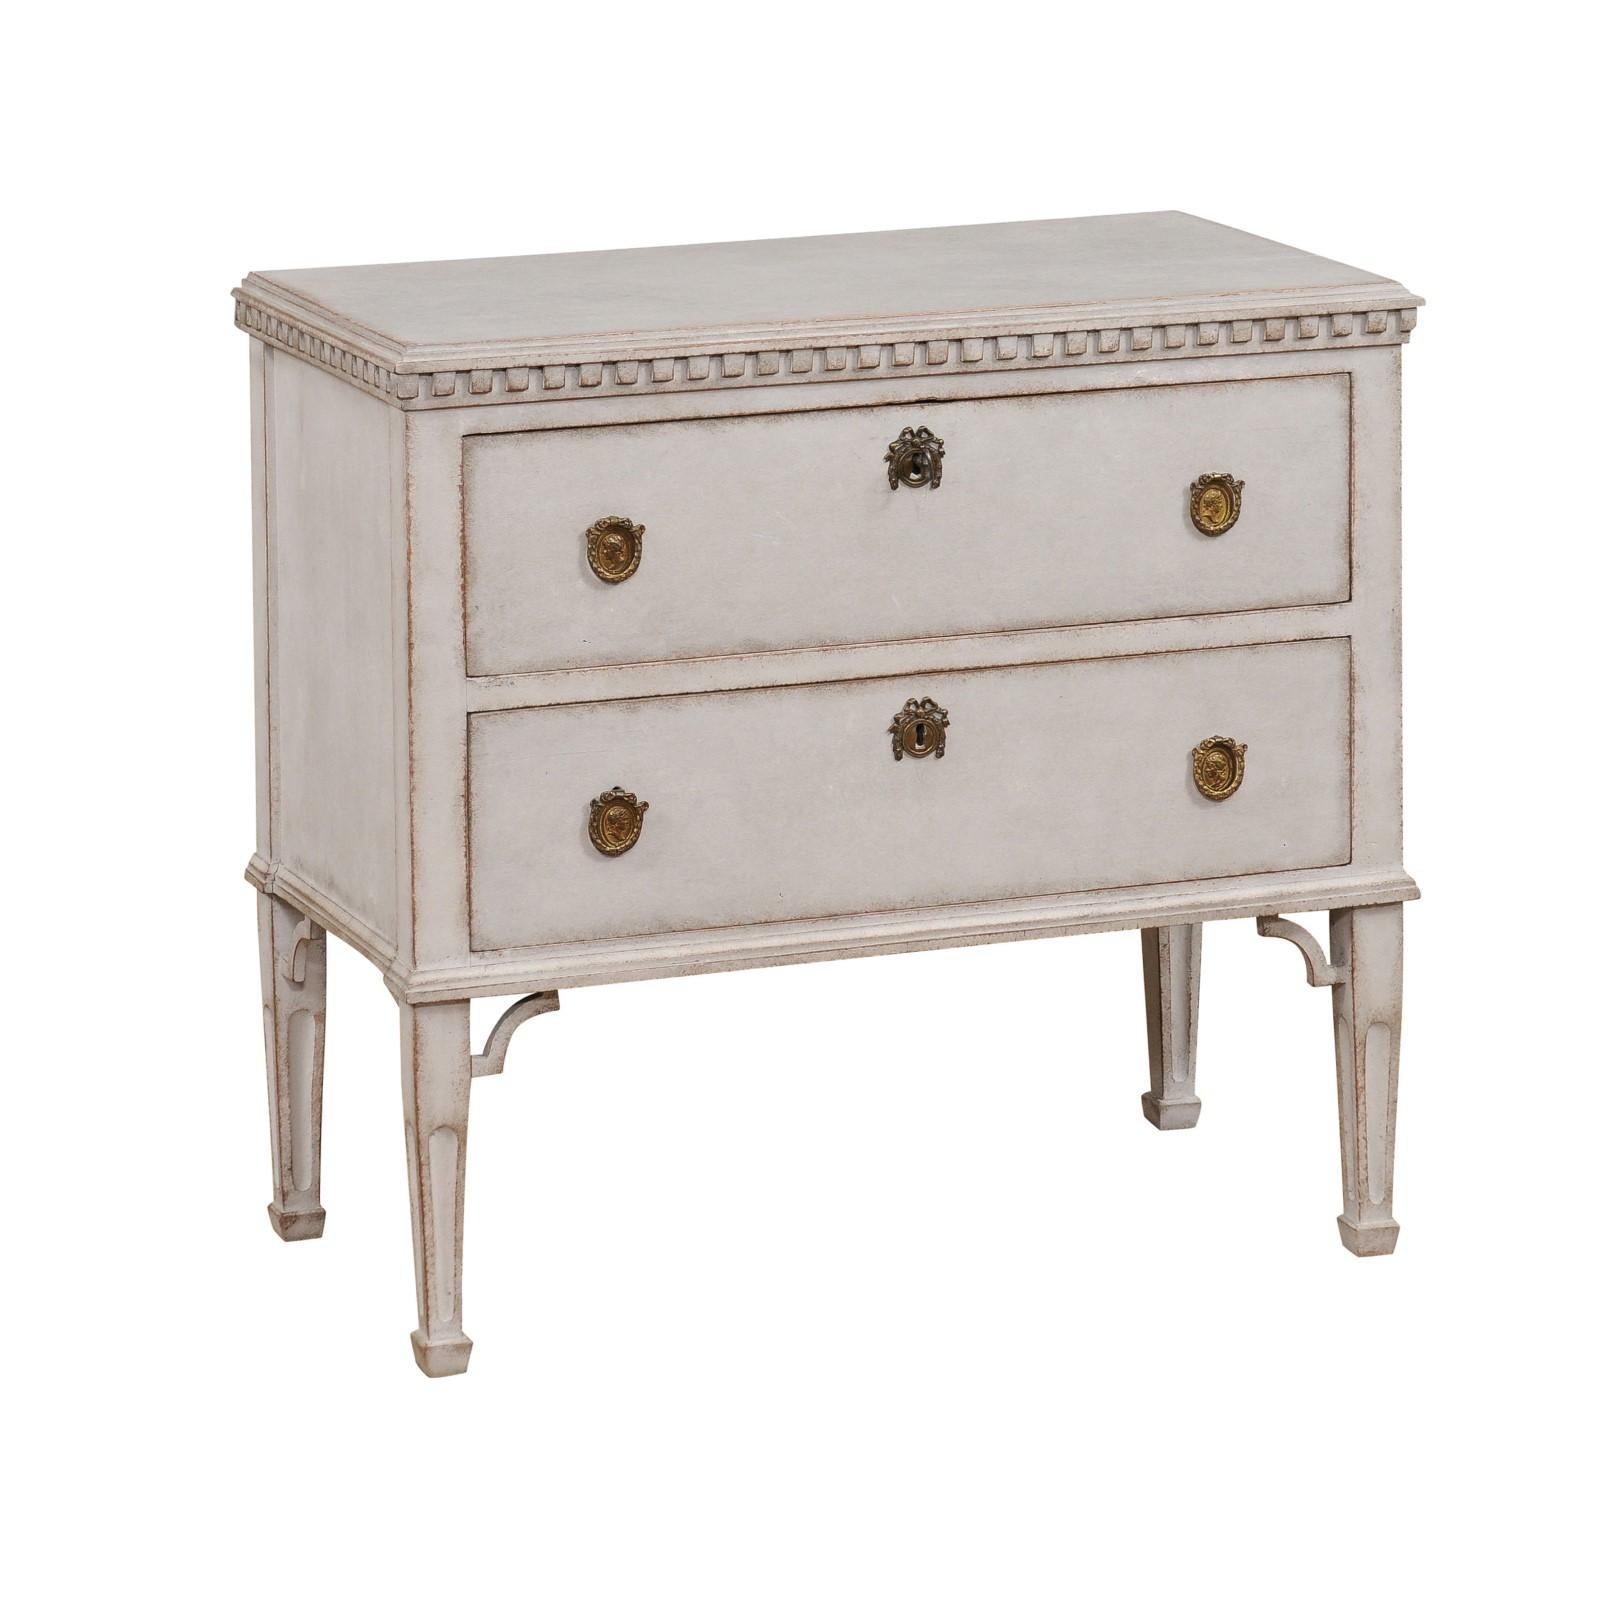 A Swedish Gustavian style chest of drawers from the 19th century with light gray paint, two drawers, carved dentil molding, tapered legs and carved spandrels. This Swedish Gustavian style chest of drawers, hailing from the 19th century, exudes the